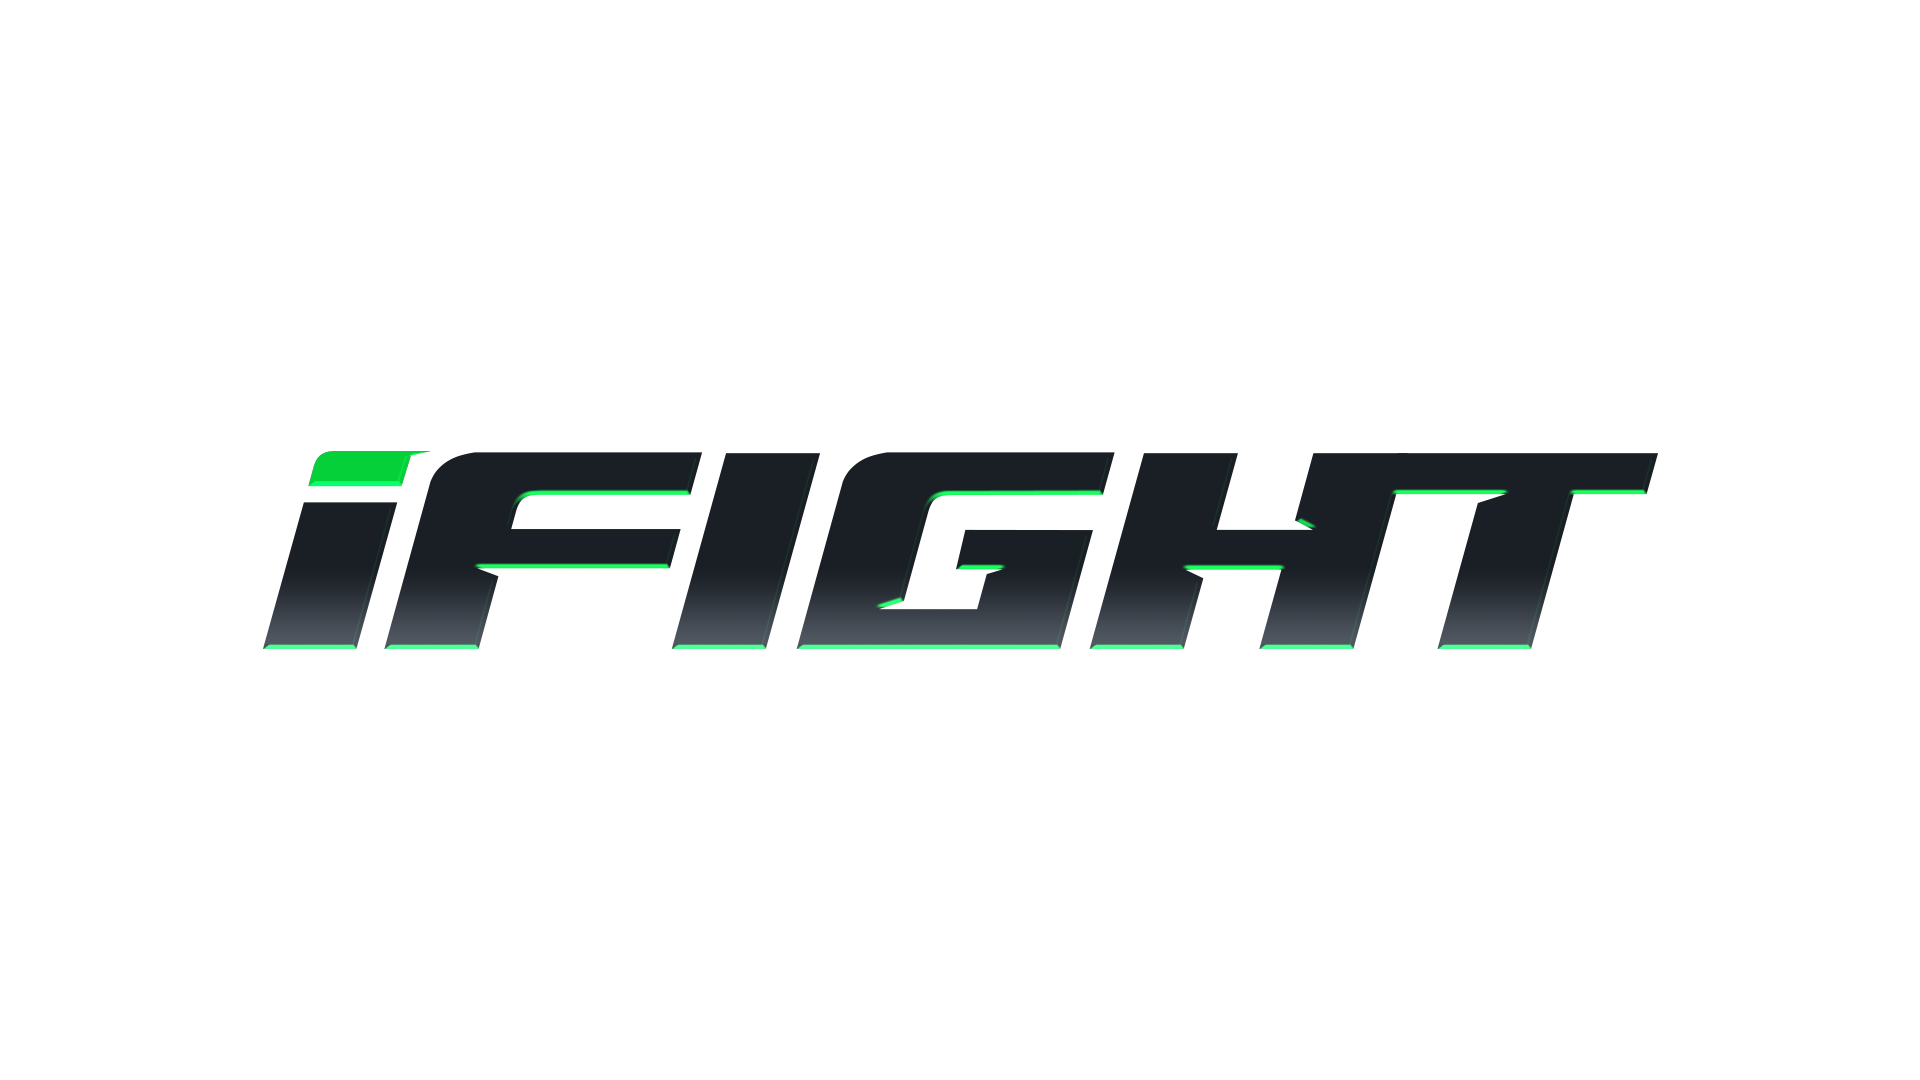 iFightstaging